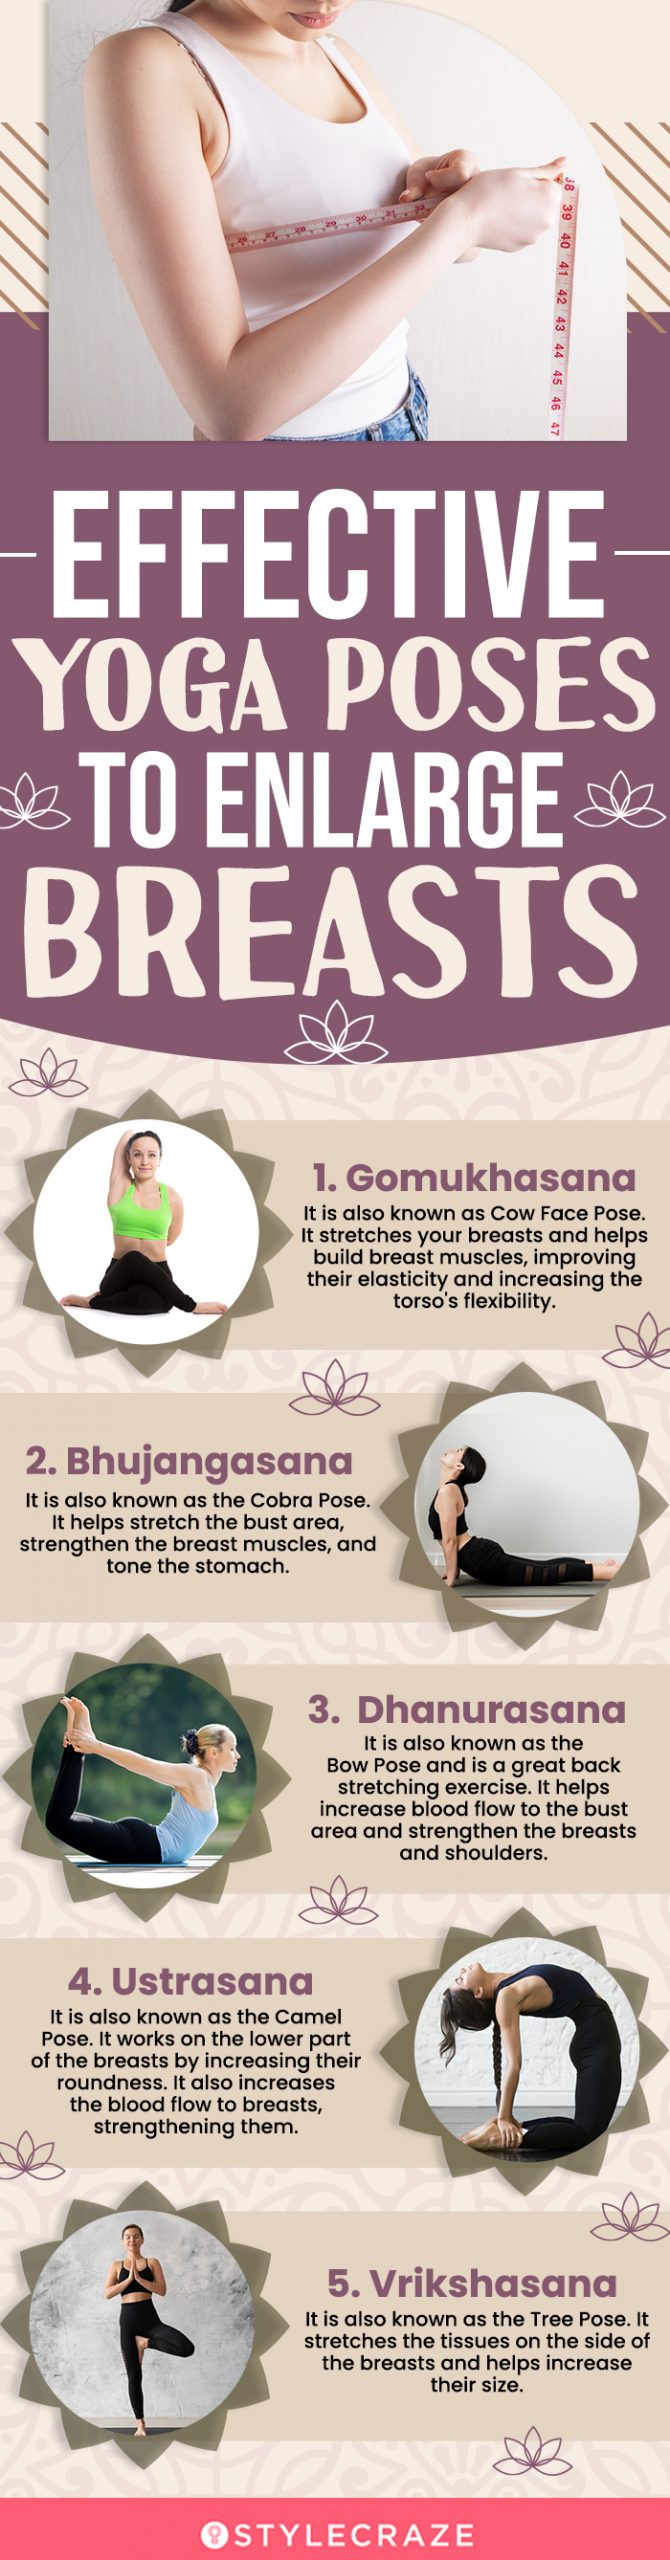 effective yoga poses to enlarge breasts [infographic]